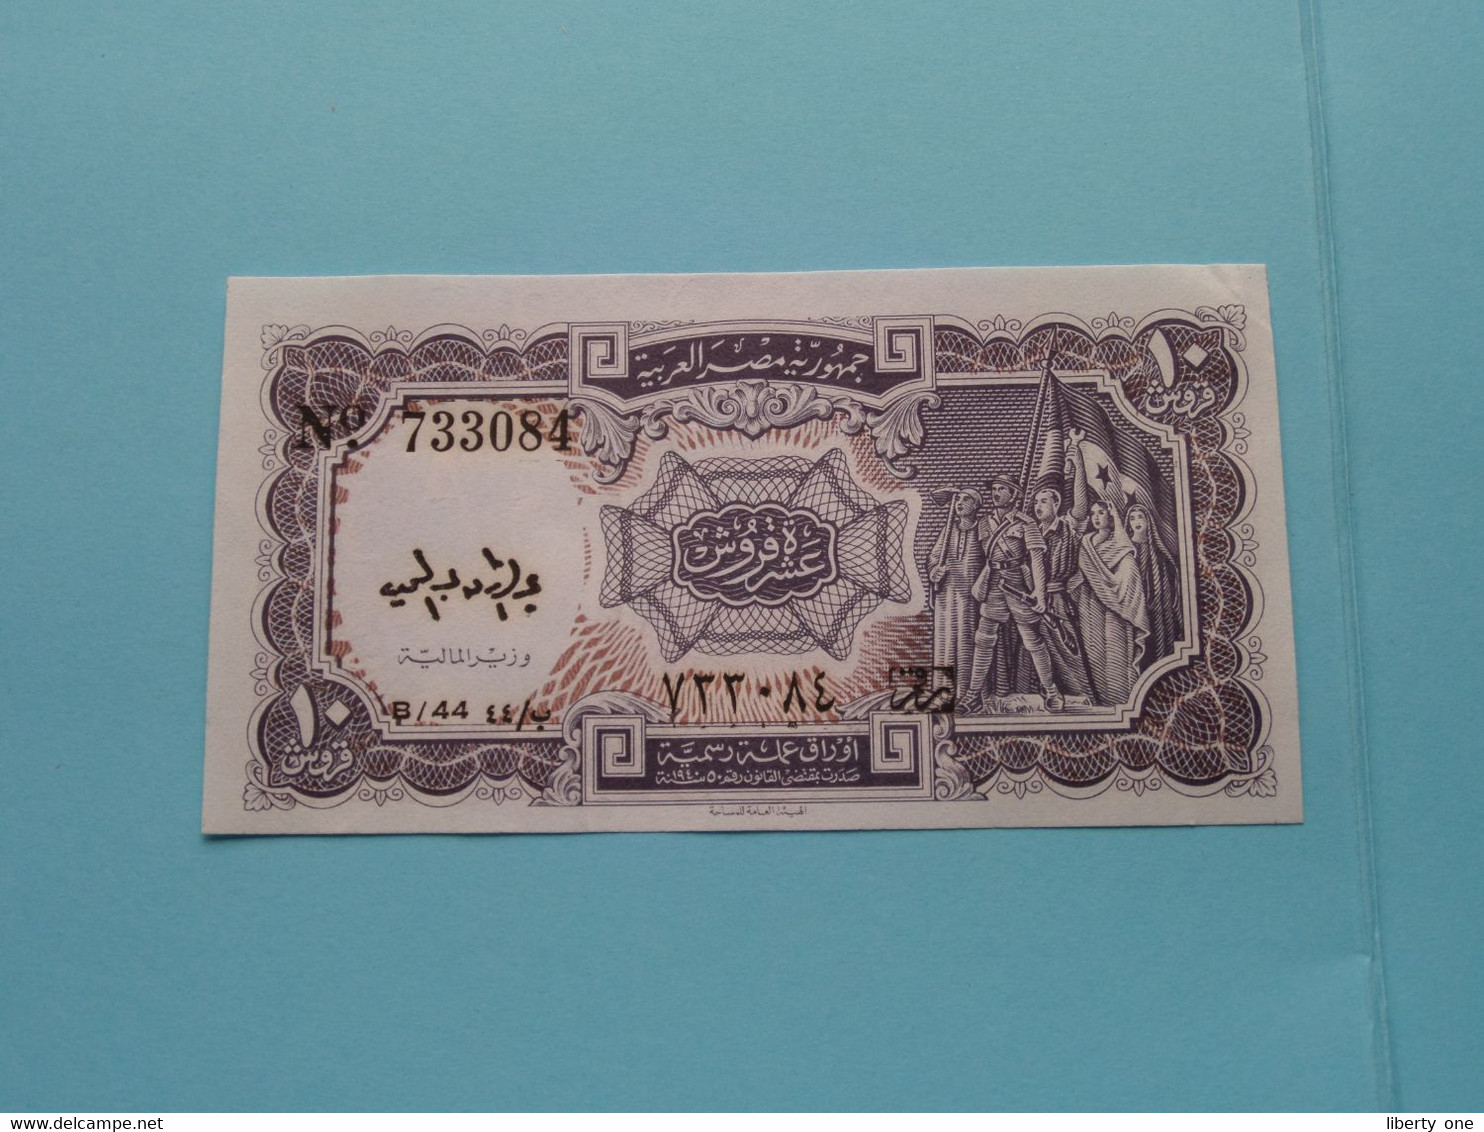 10 Piastres > The Arab Republic Of EGYPT Currency Note N° 733084 - B/44 ( For Grade, Please See Photo ) UNC > Egypt ! - Egipto